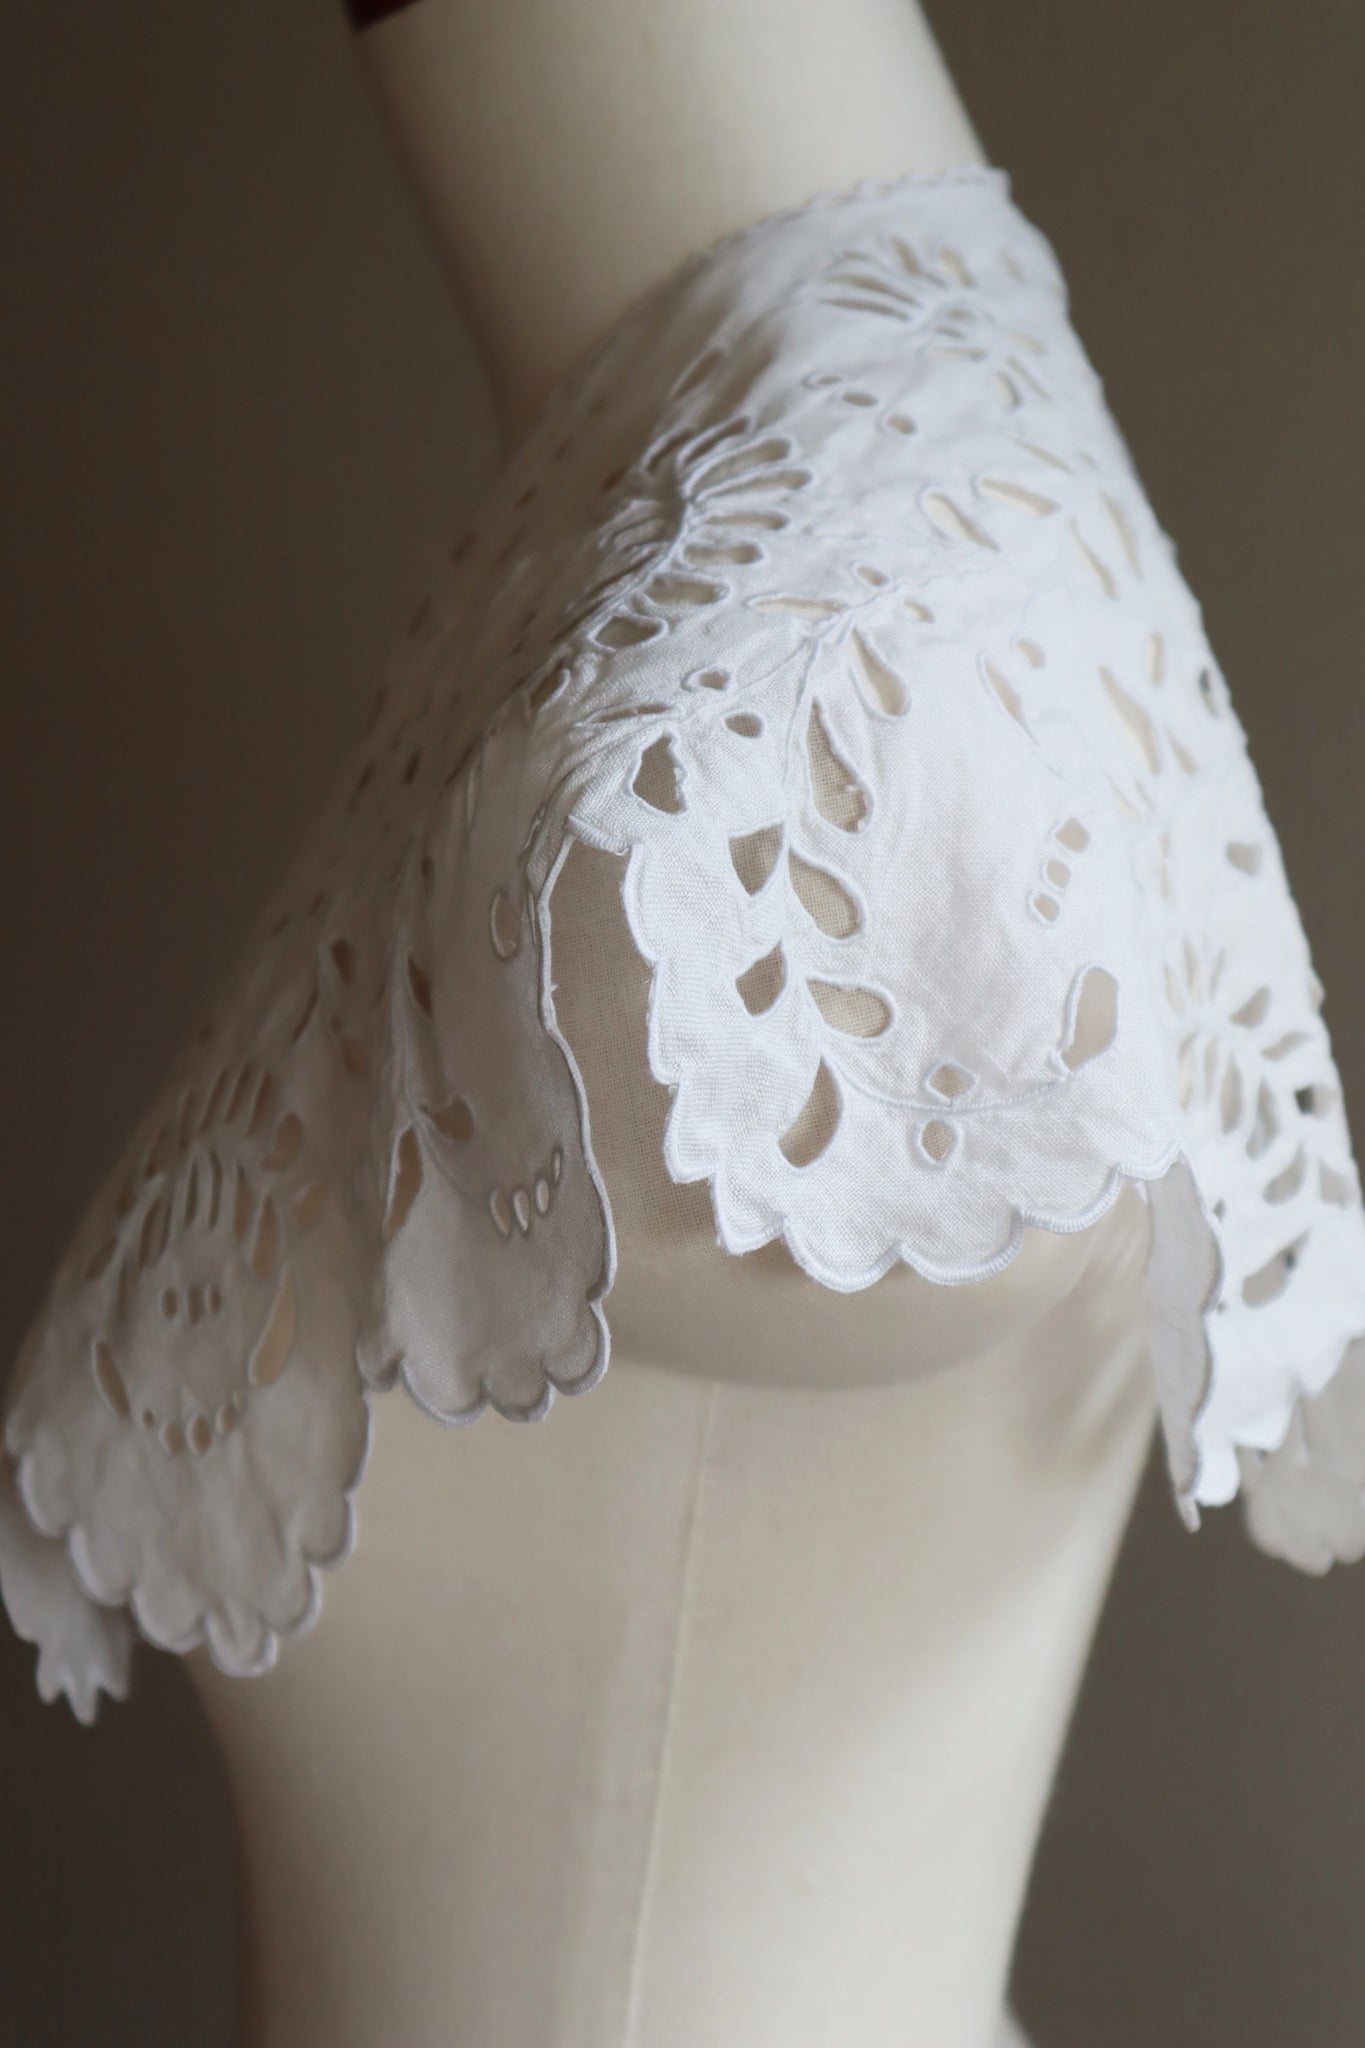 19th Hand-Embroidered Linen Cut Work Lace Big Collar